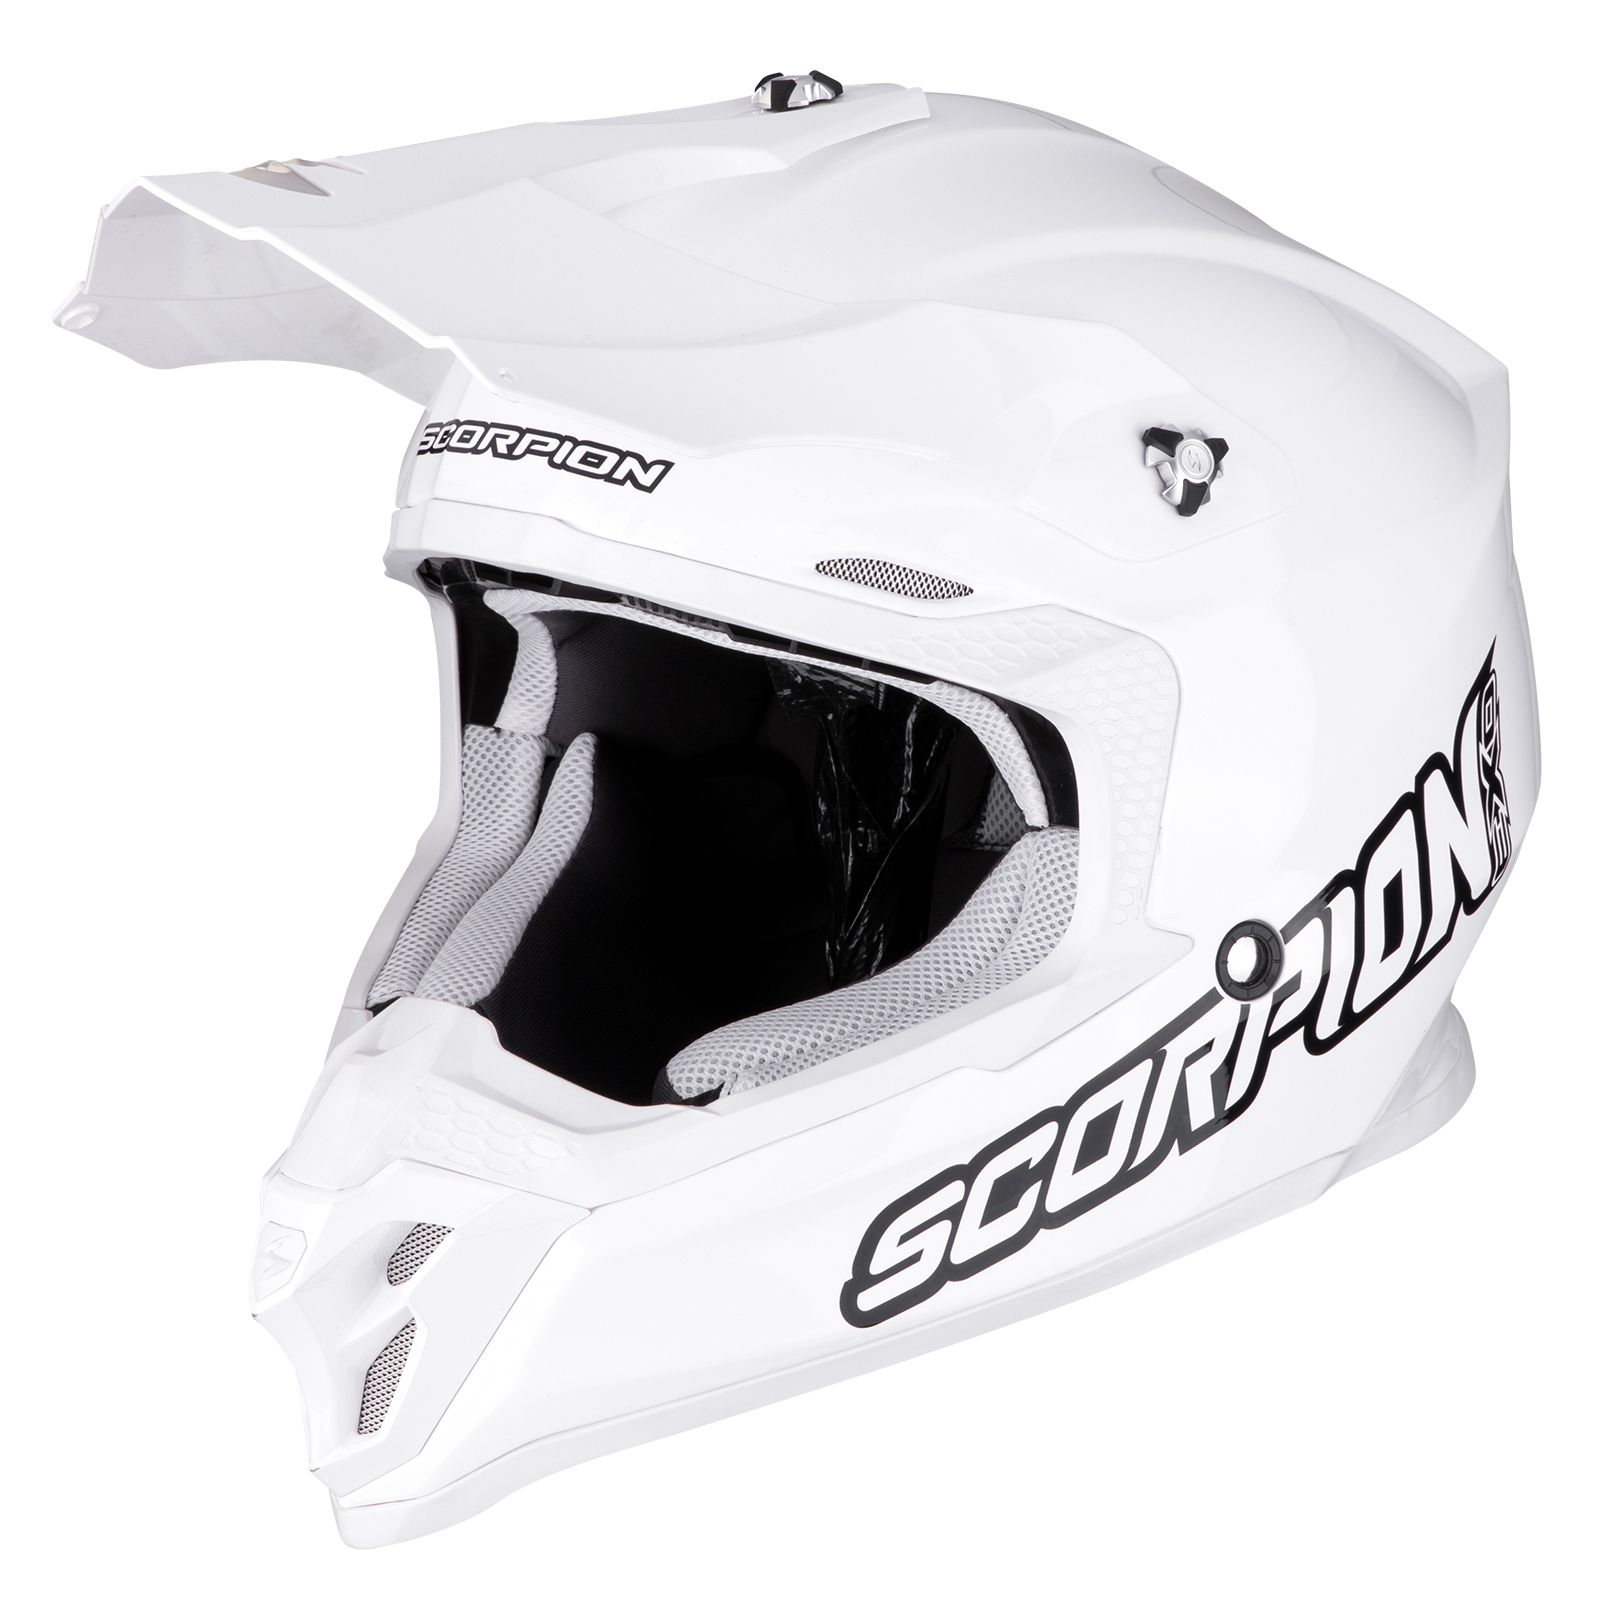 Image of Casque cross Scorpion Exo VX-16 AIR - SOLID - WHITE 2022